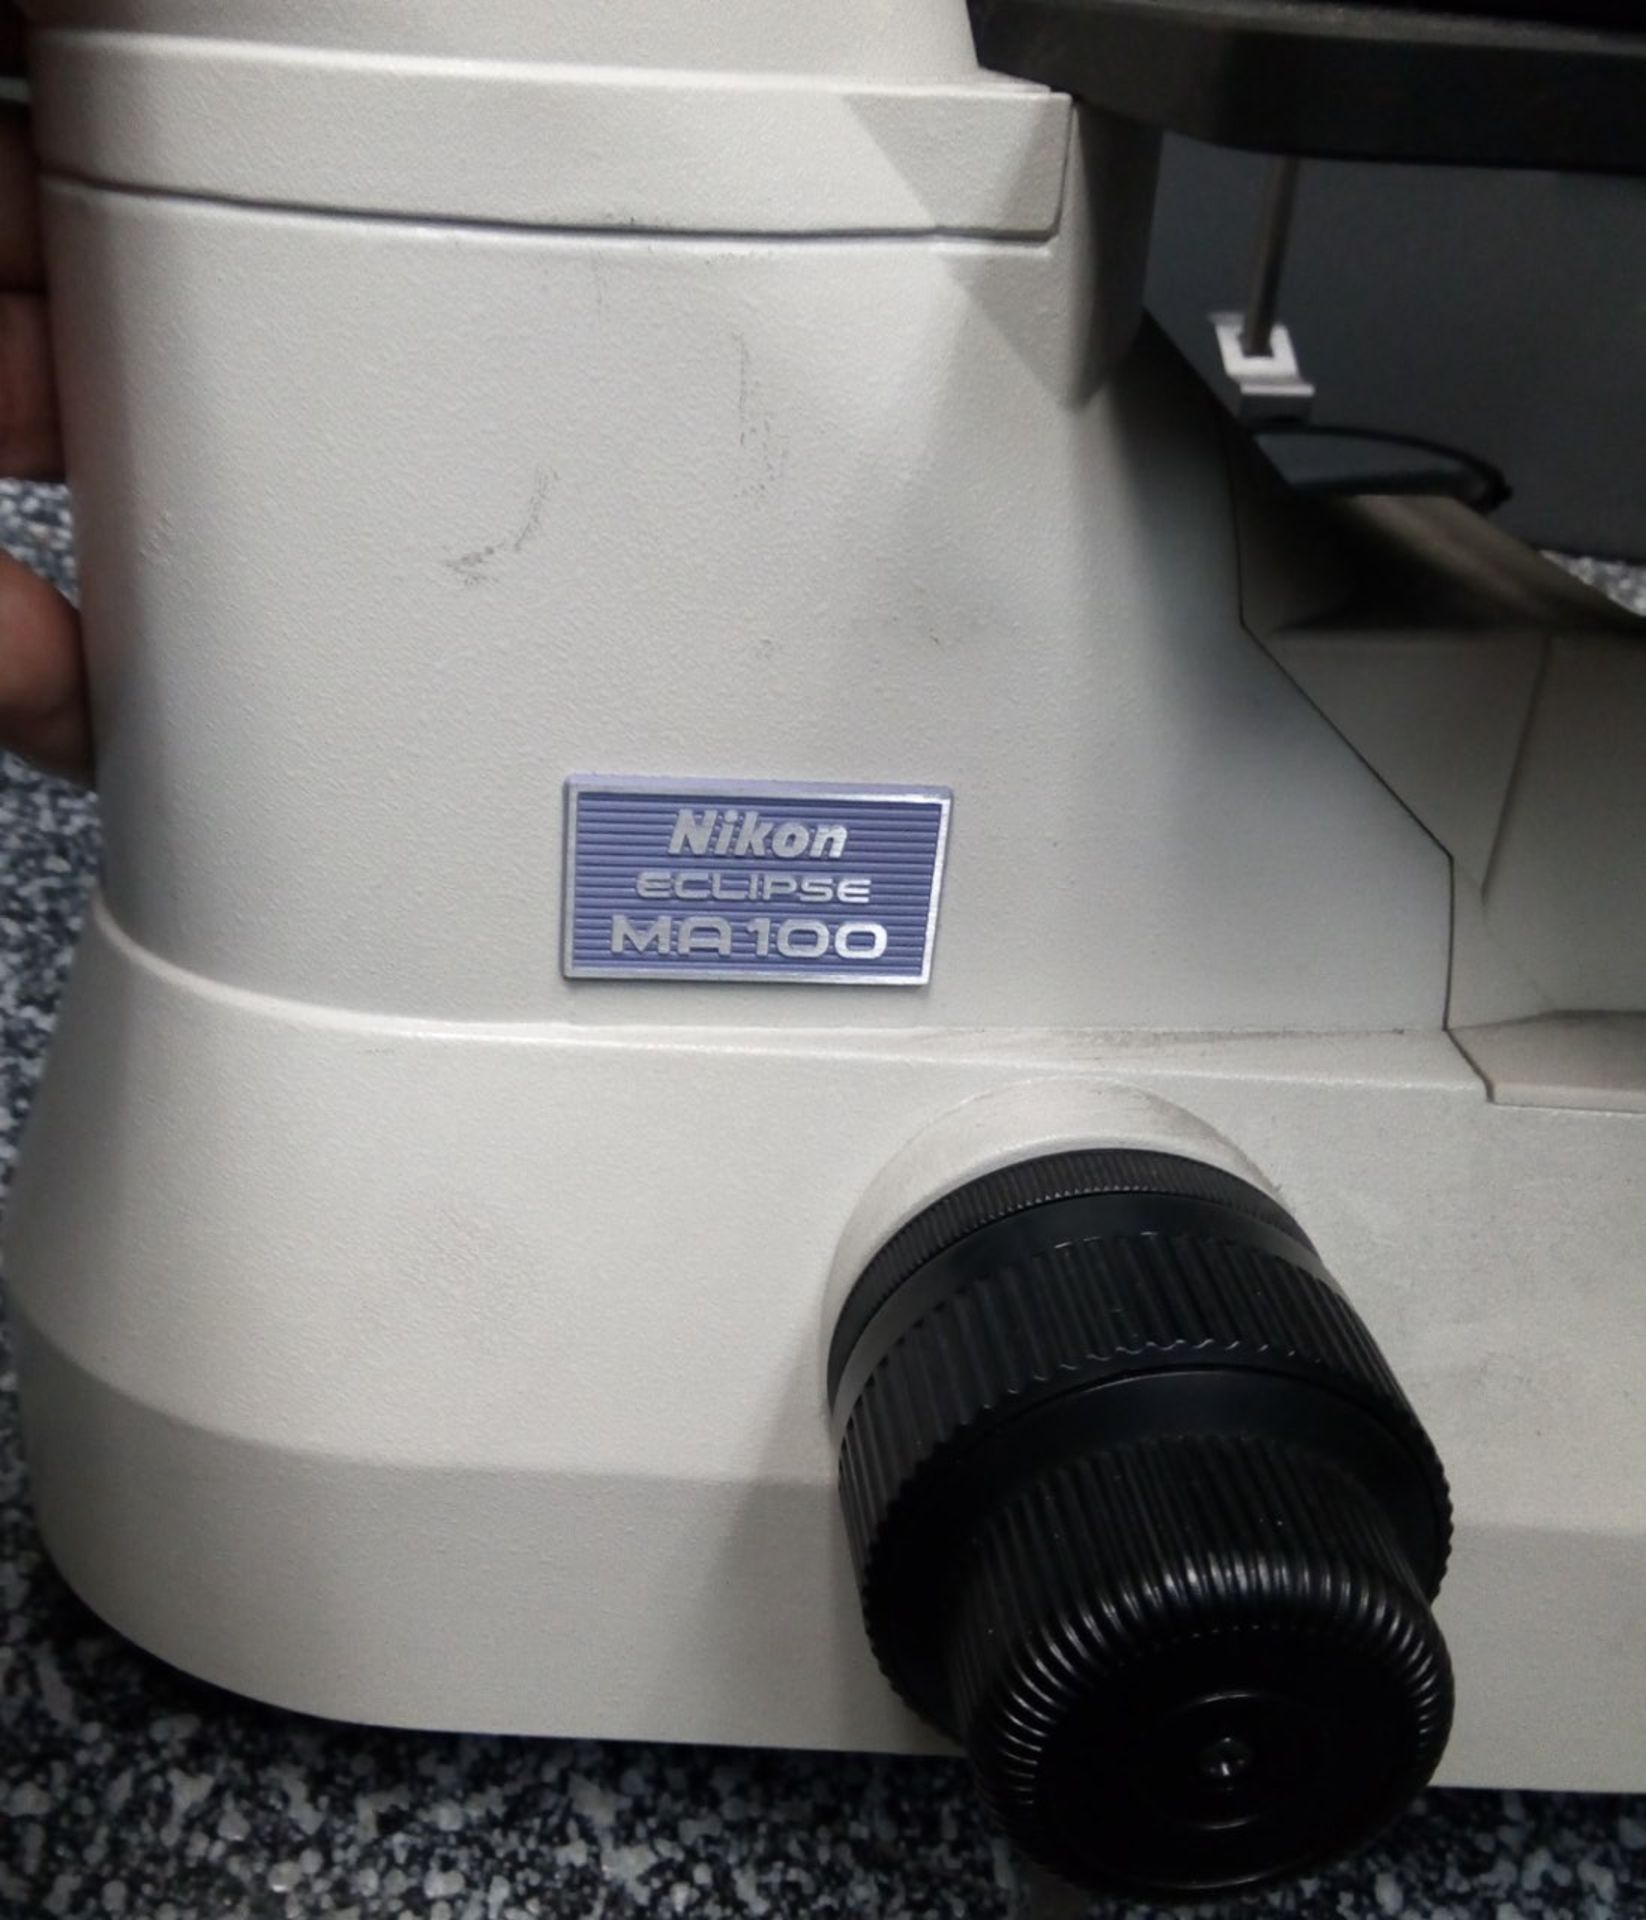 NIKON ECLIPSE MA100 MICROSCOPE, W/ CPU AND SOFTWARE - Image 3 of 3